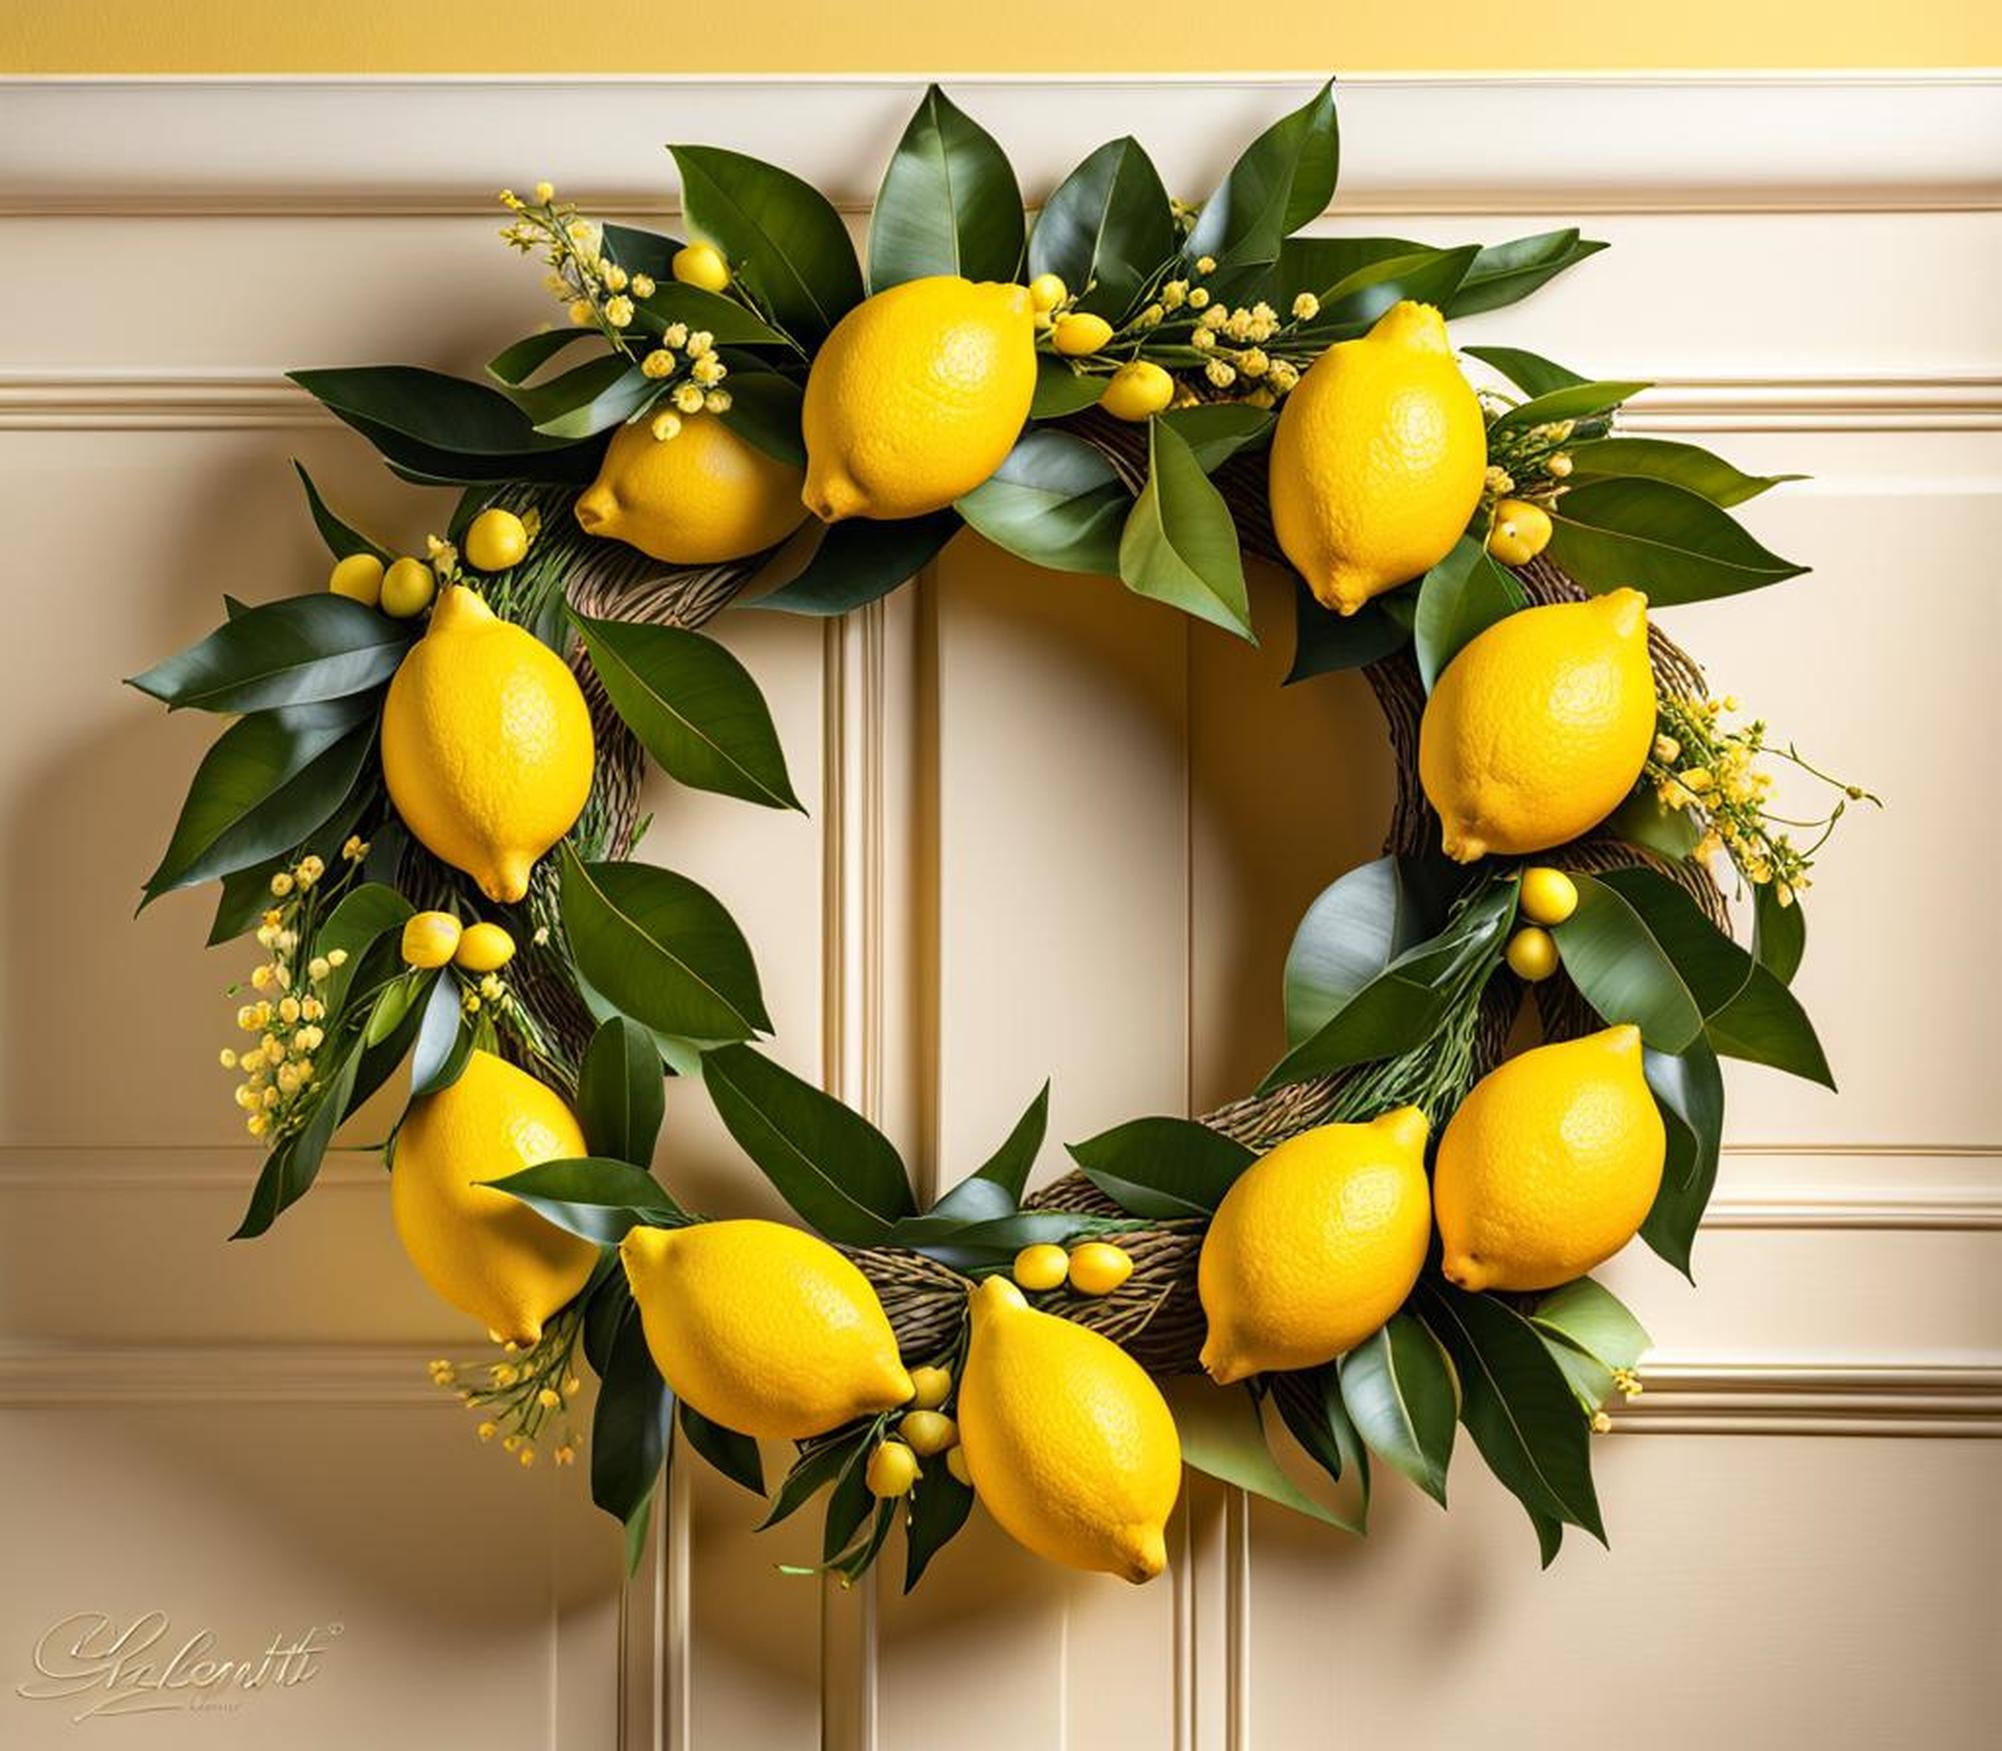 Weave Cheerful Lemon Wreaths For A Bright Home Accent